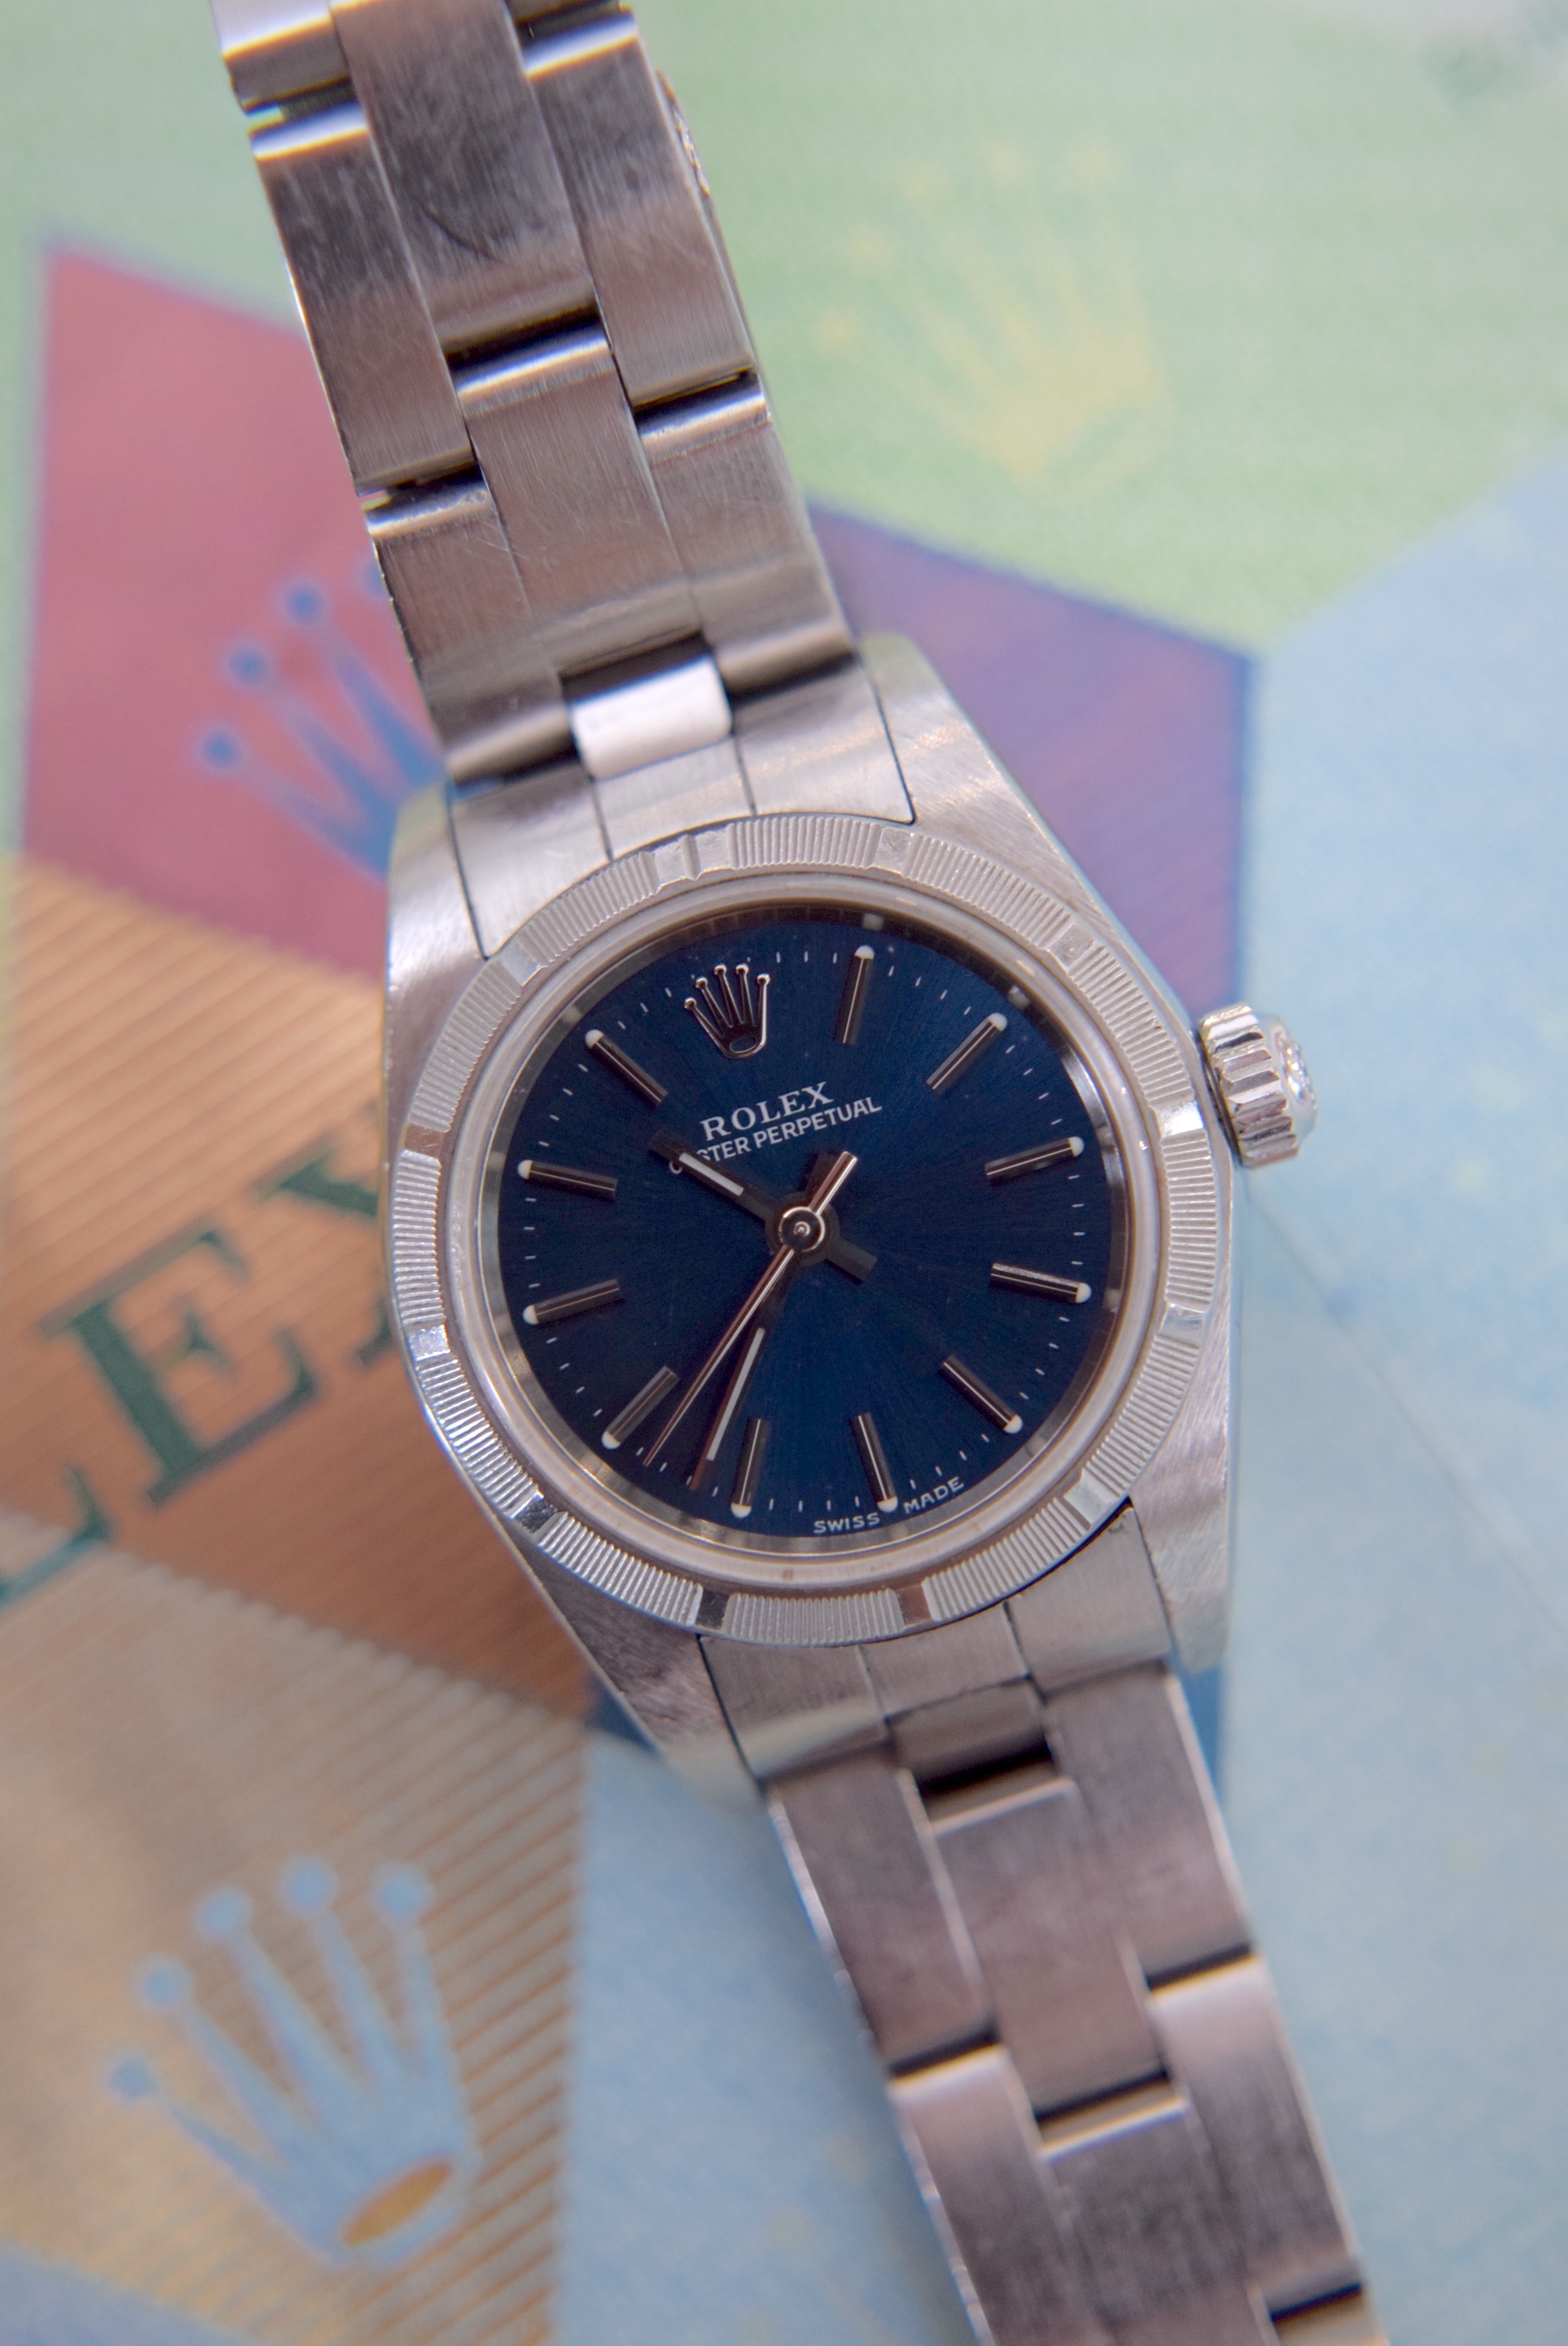 2004 ROLEX OYSTER PERPETUAL REF. 76030 (ORIGINAL BLUE DIAL) WITH CERTIFICATE - Image 4 of 14